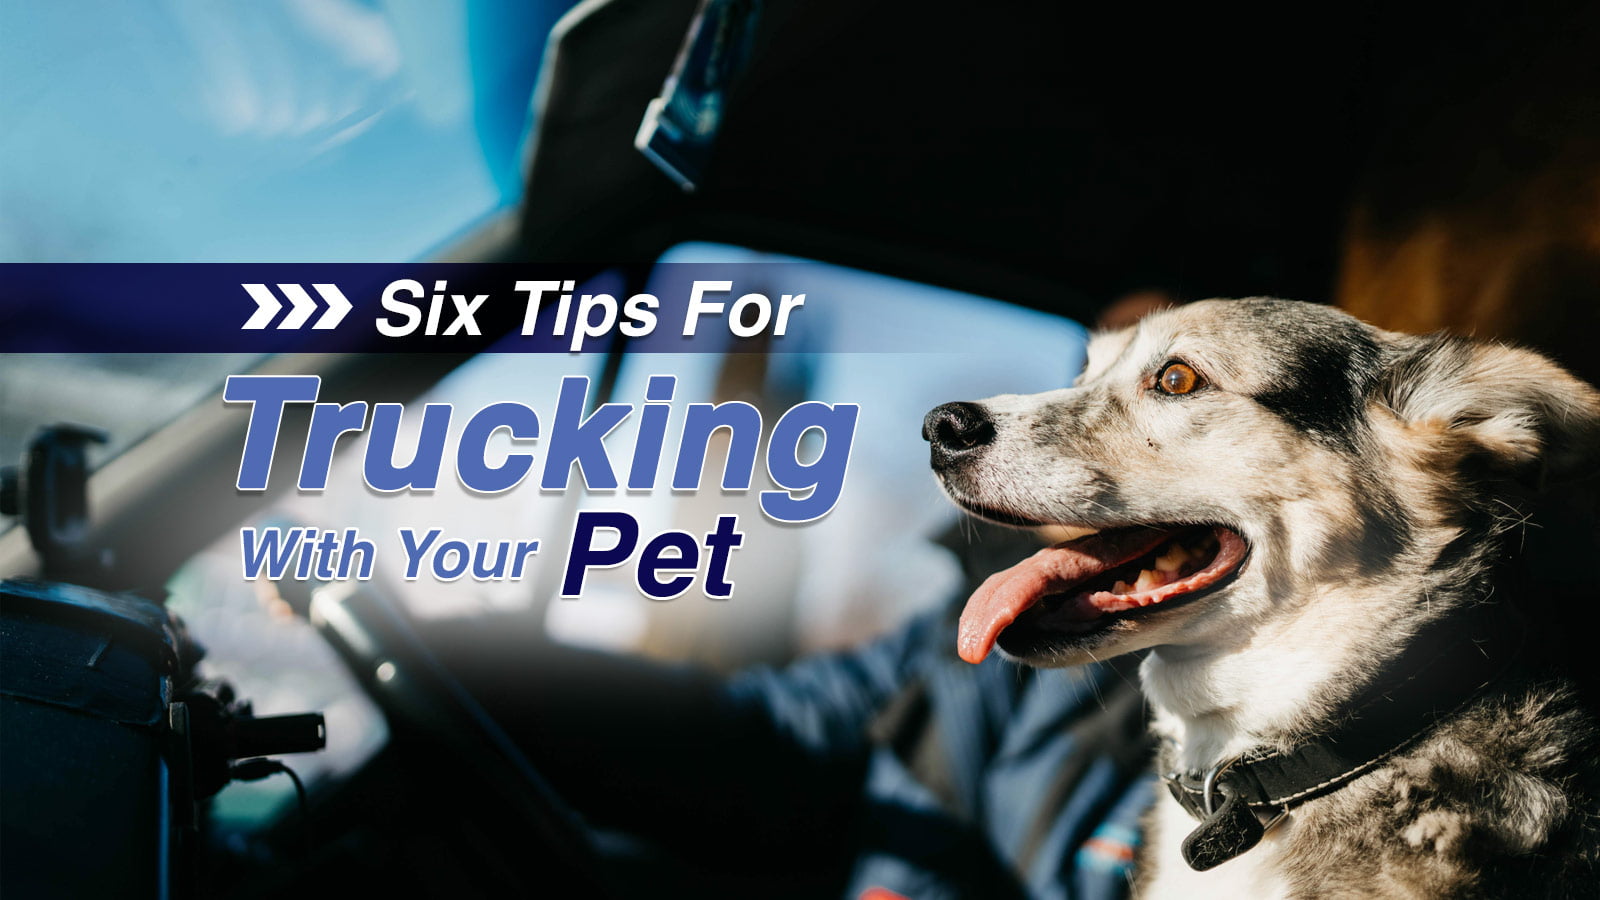 Six tips for trucking with your pet